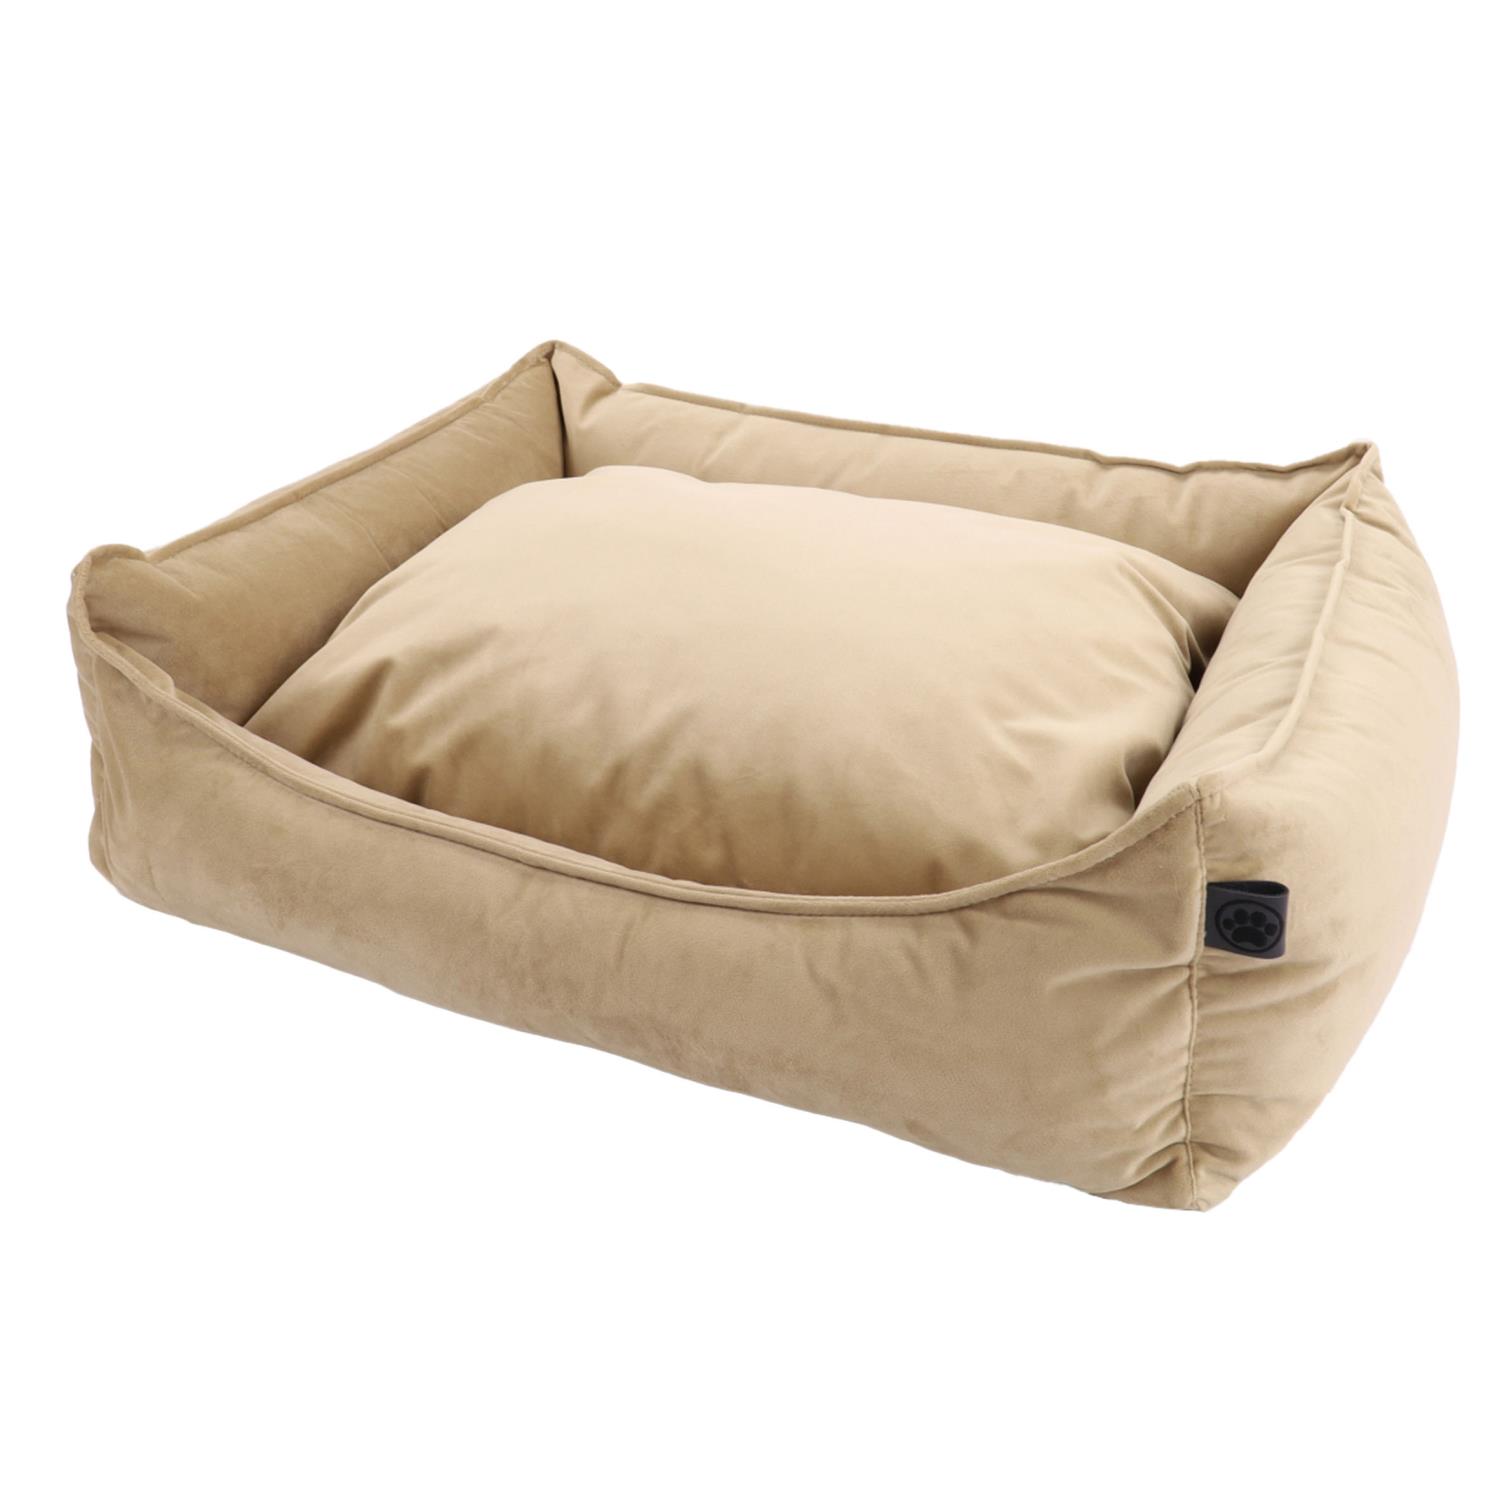 OS Dog Cocoon Velours Revers Pillow.90/70/22 04-Beige